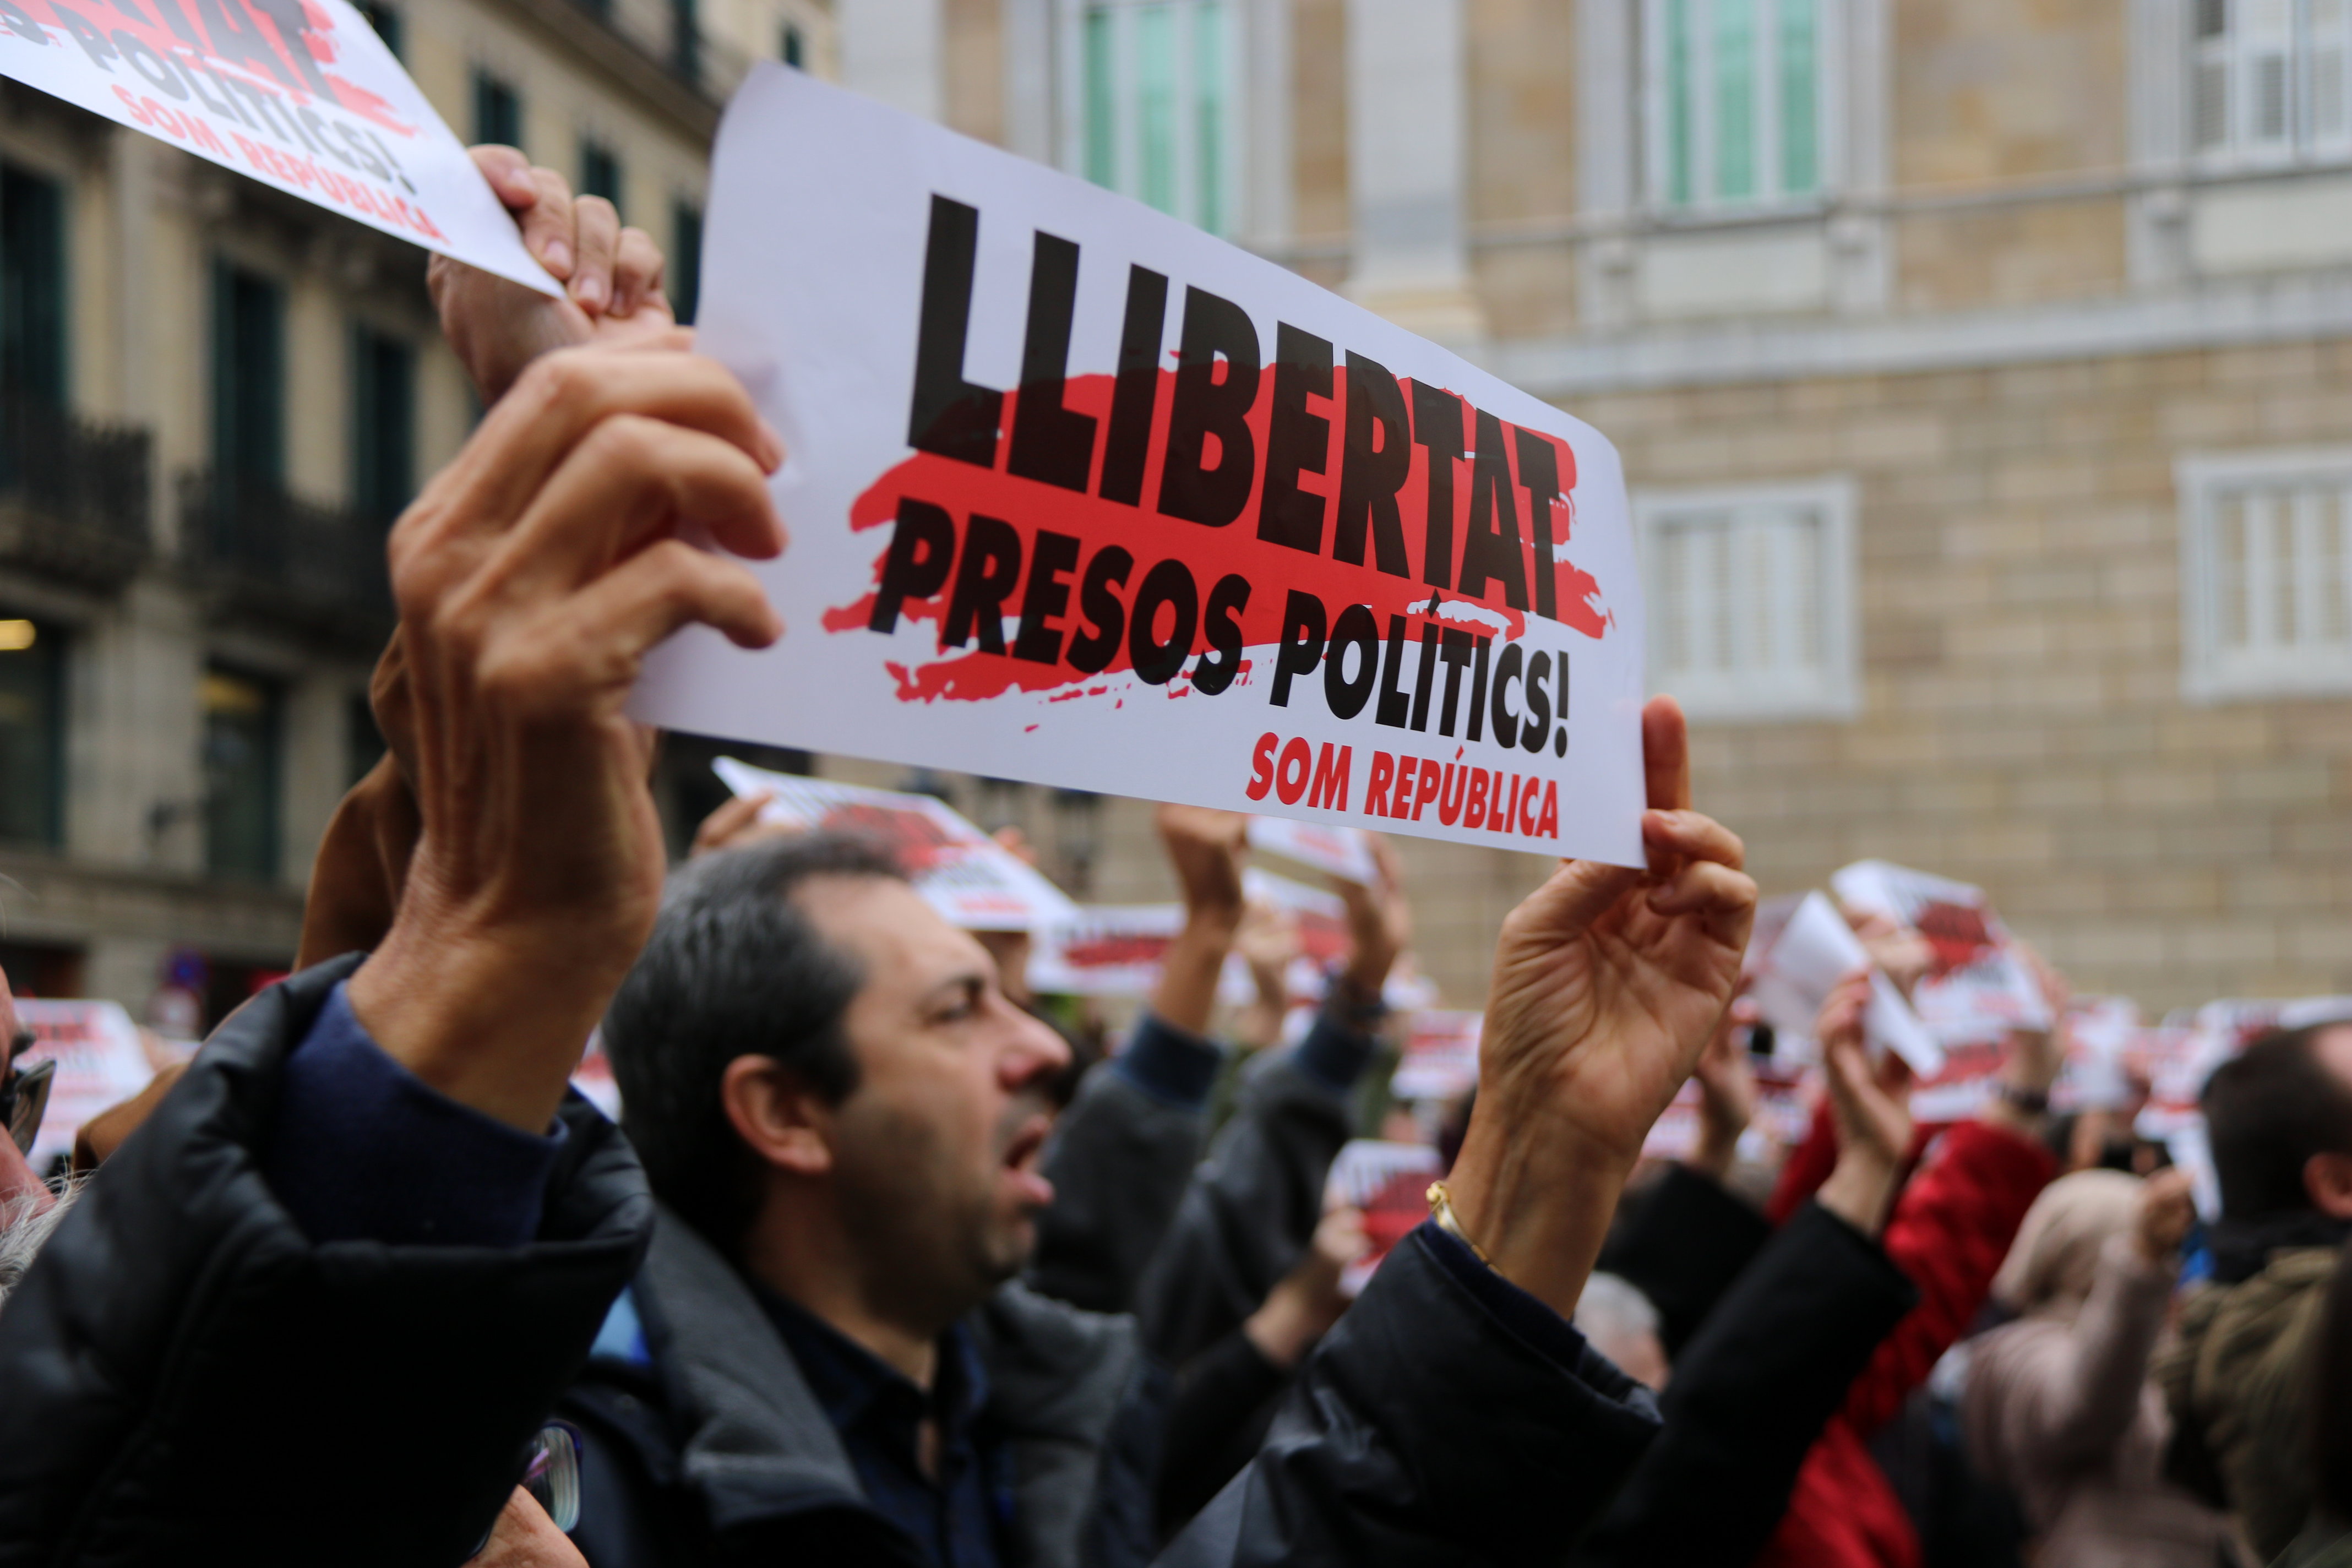 Protesters holding “Freedom political prisoners” signs in Sant Jaume square in Barcelona (by Andrea Zamorano)